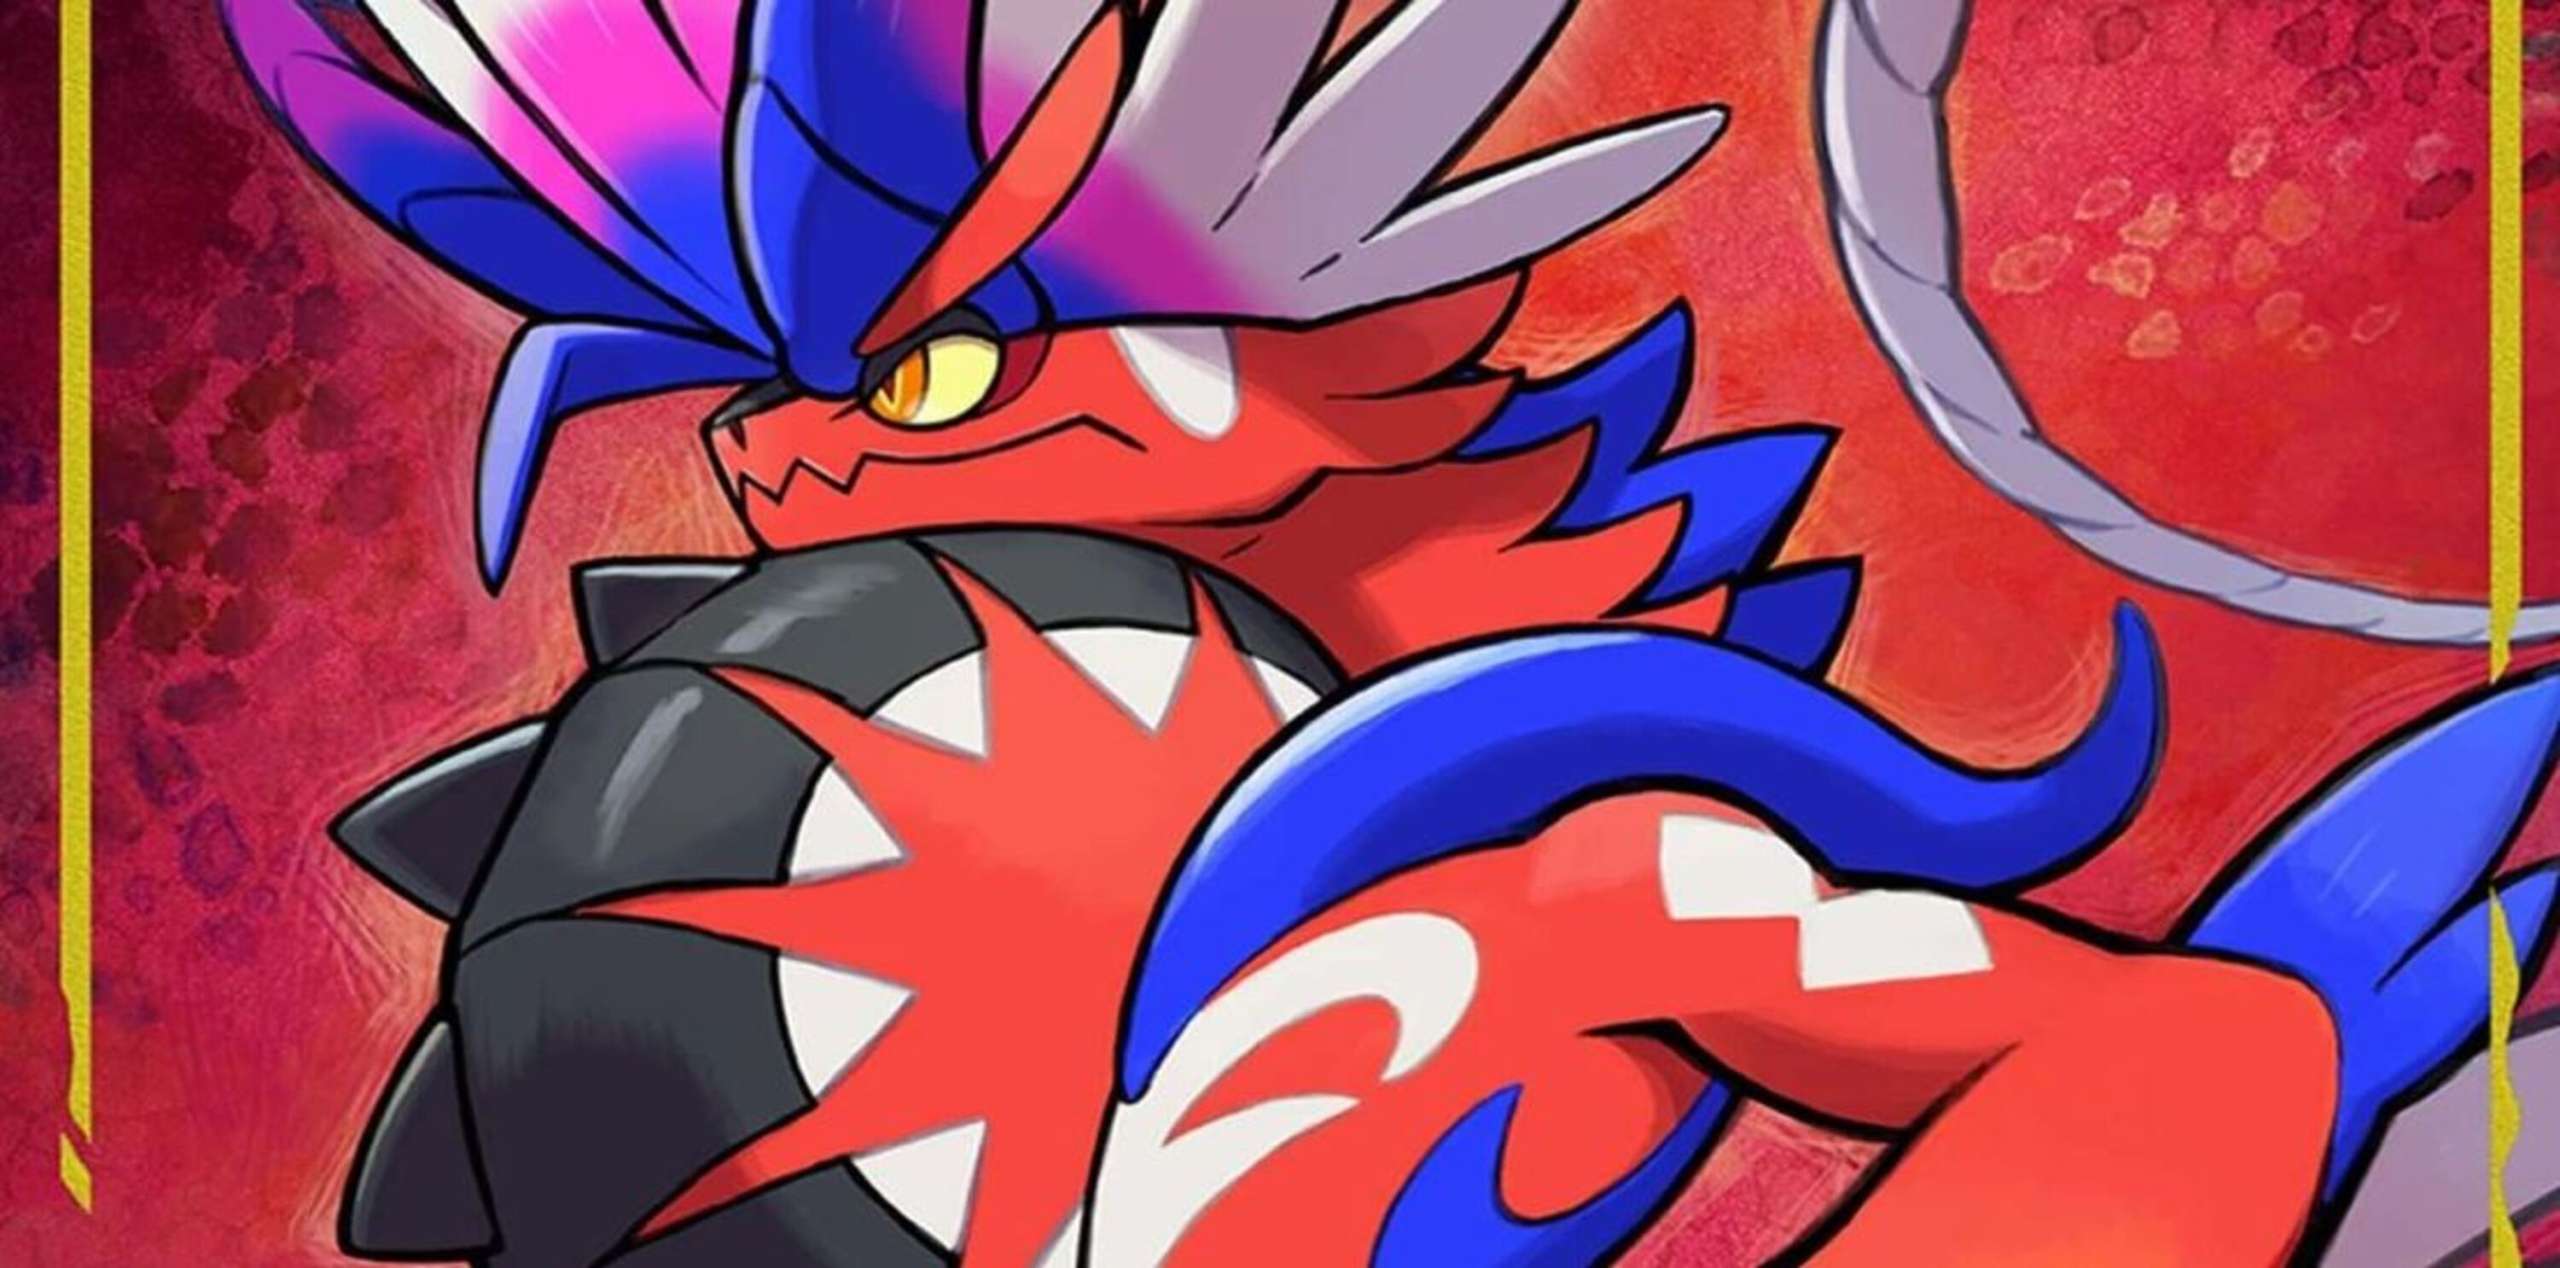 The Wheel Of The Recently Revealed Legendary Pokemon Koraidon, A Creative Pokemon Scarlet And Violet Fan Makes Their Rendition Of The Creature